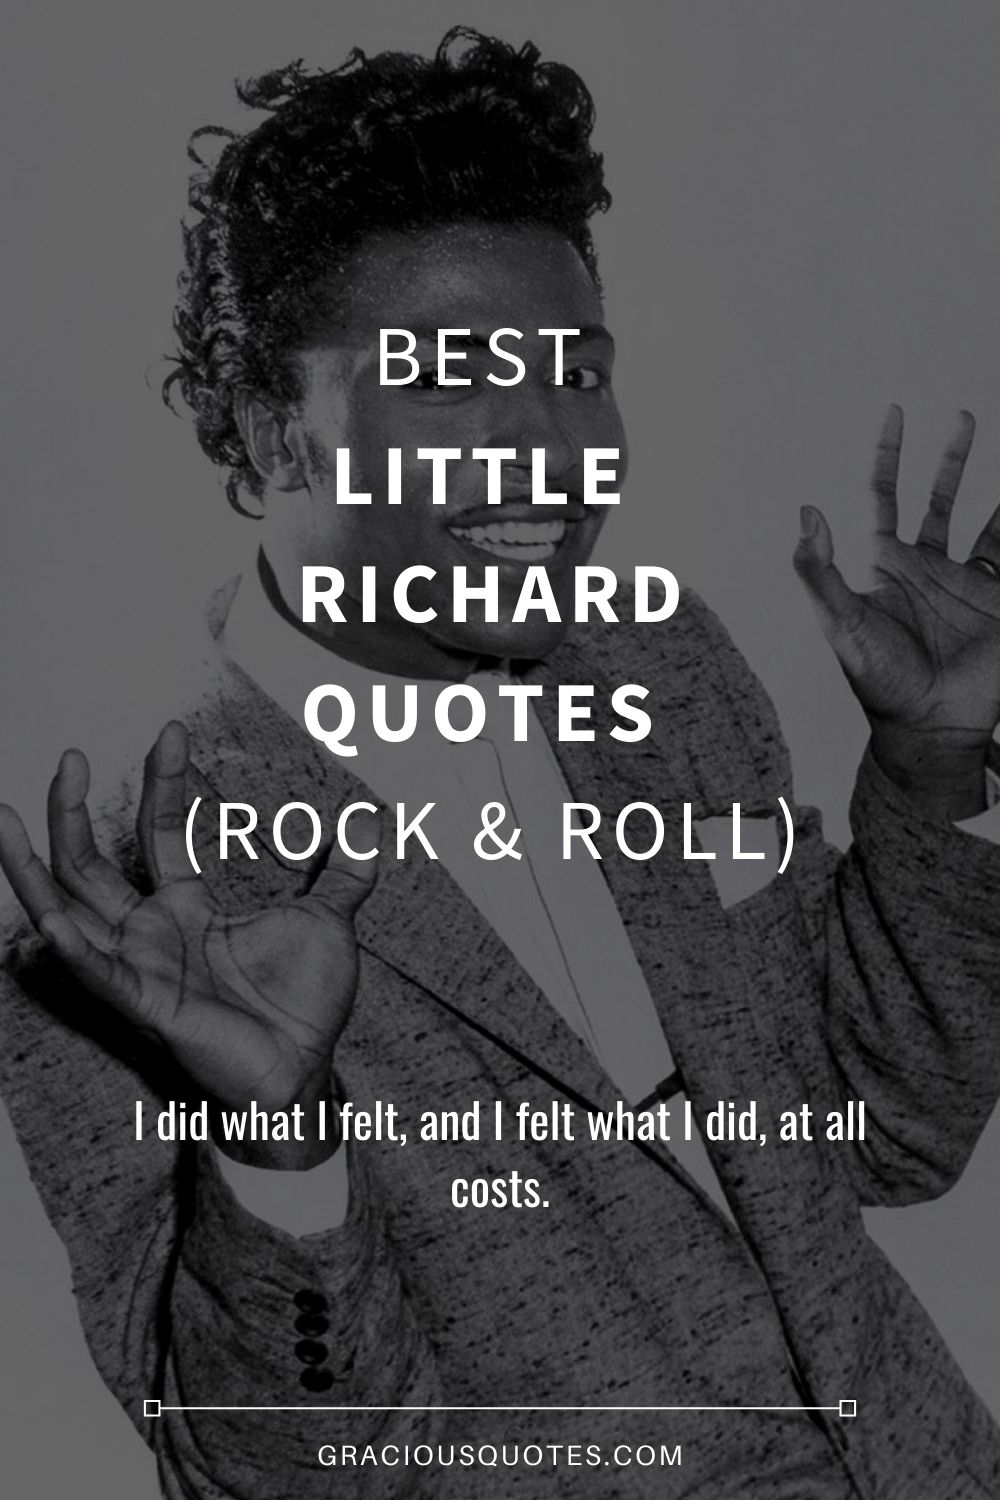 Best Little Richard Quotes (ROCK & ROLL) - Gracious Quotes